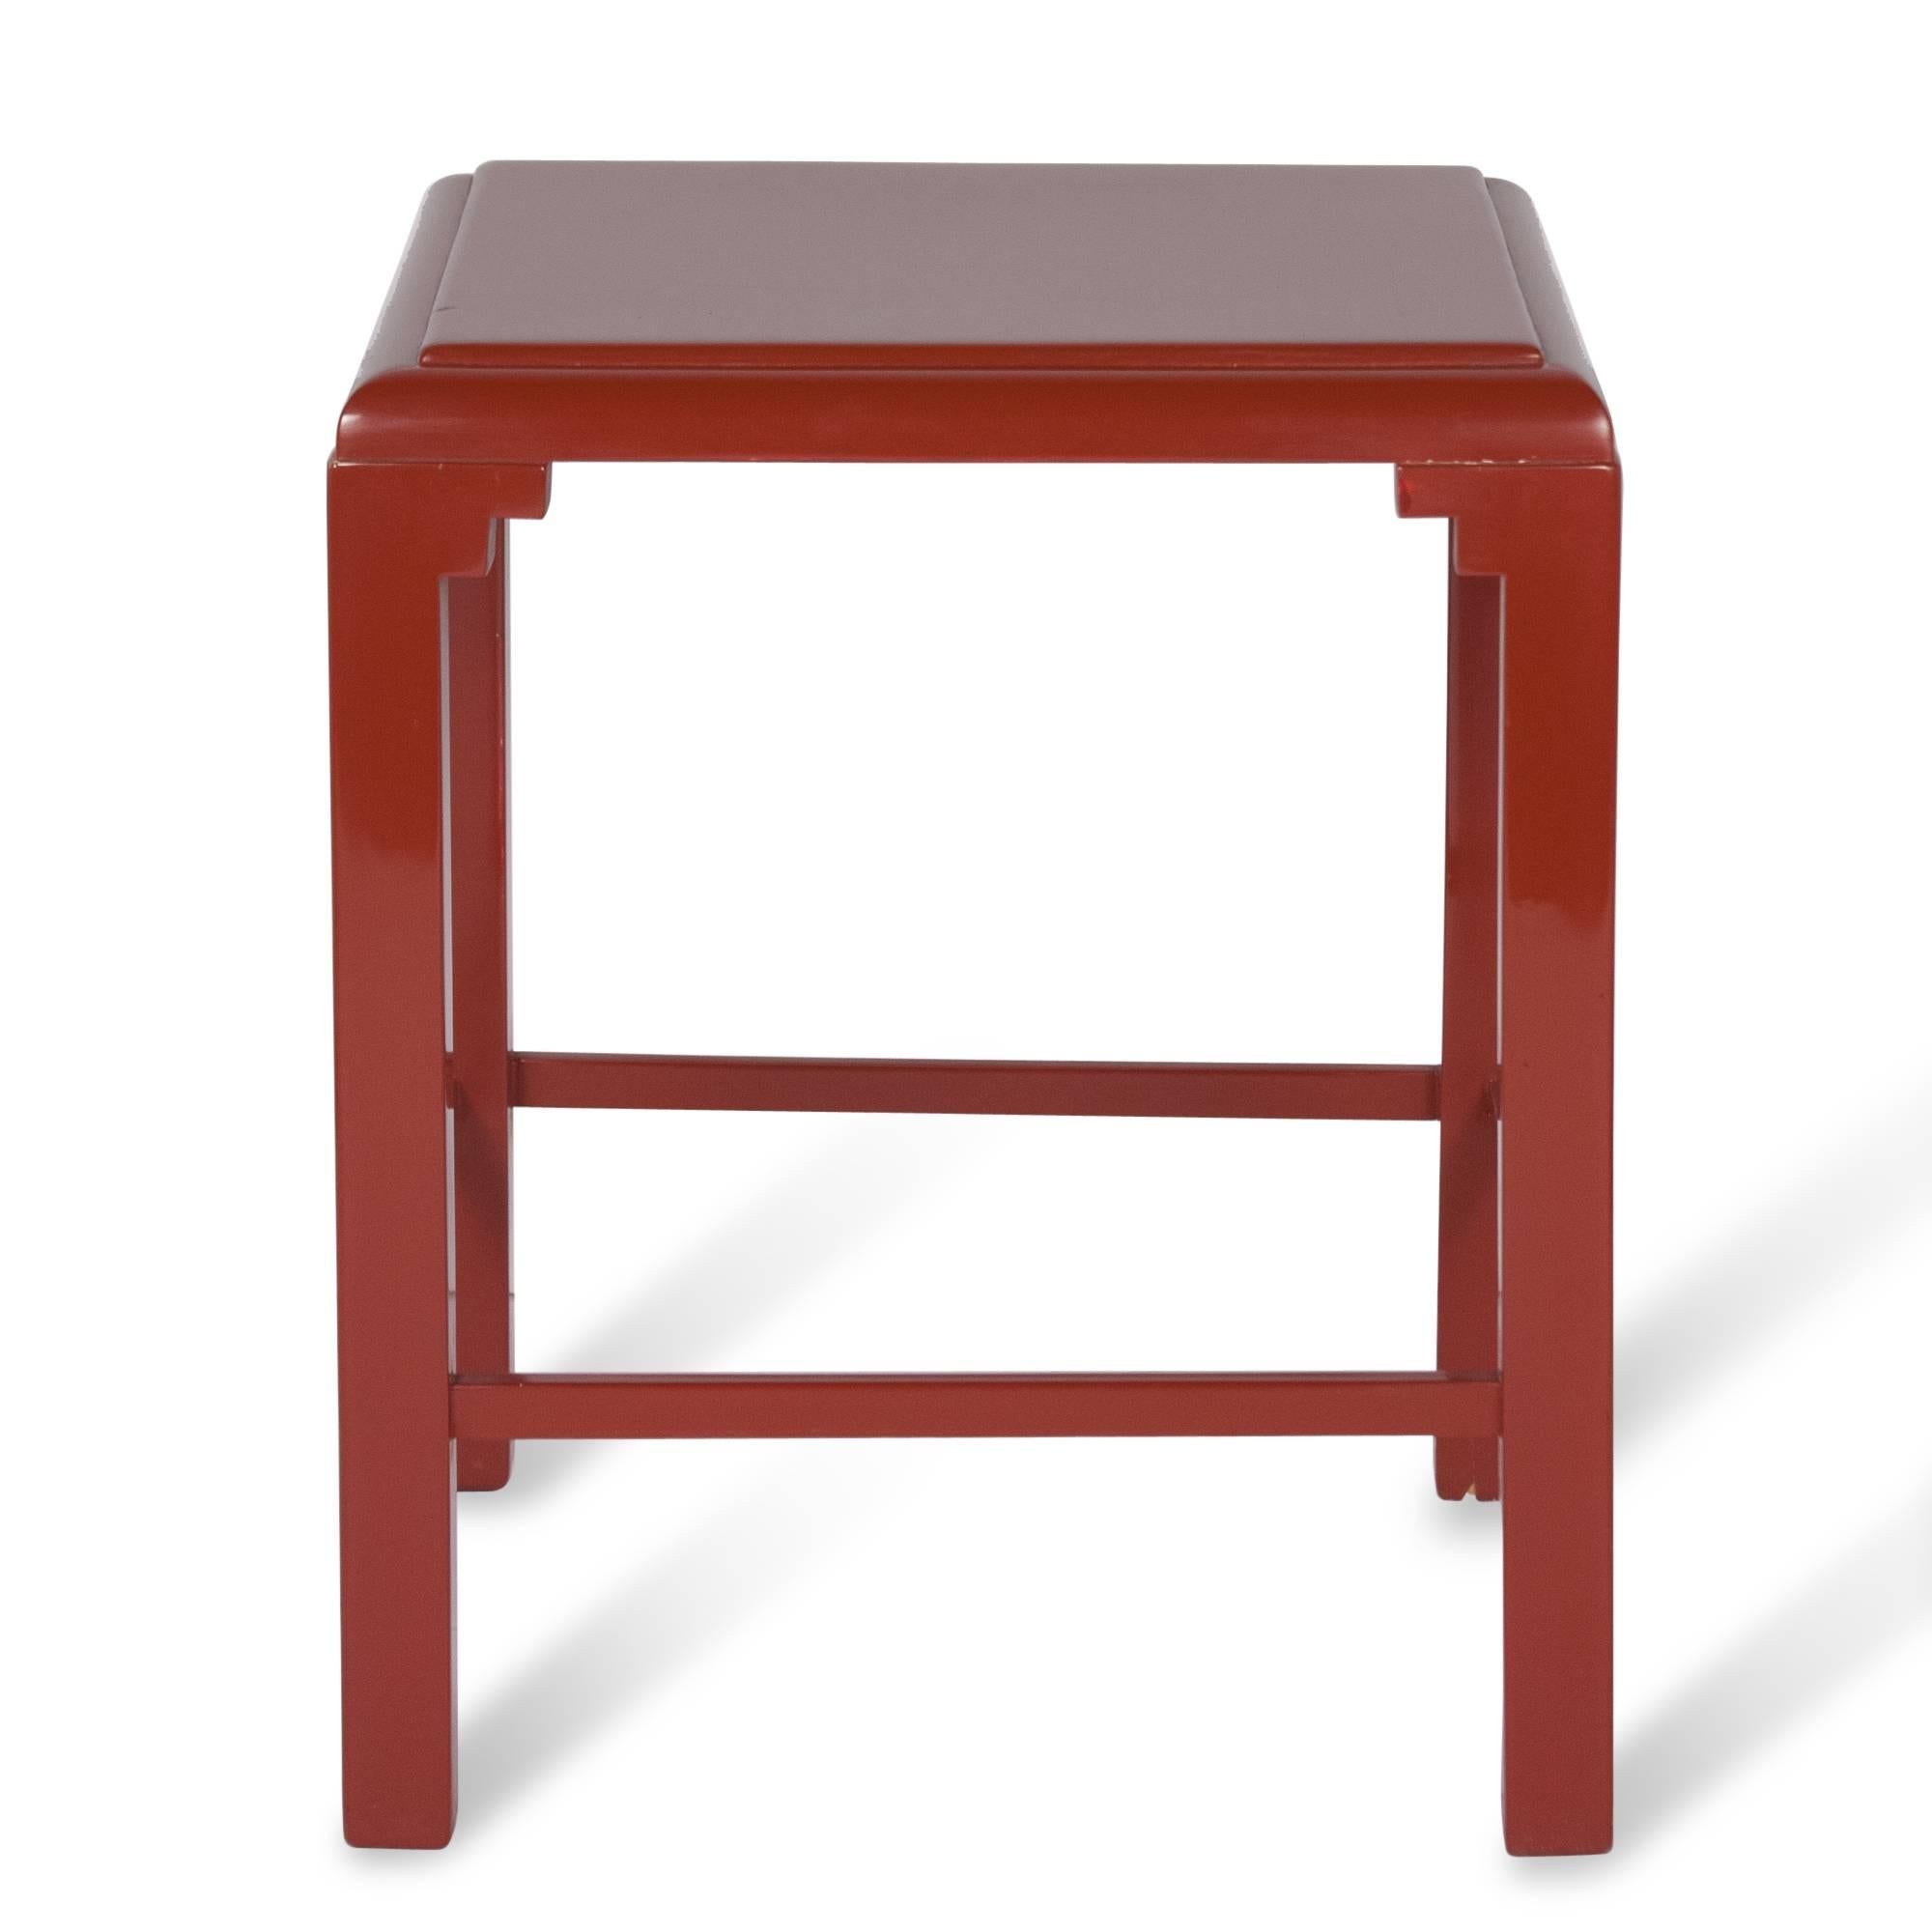 Small red lacquer table in oriental style, French, 1930s. 14